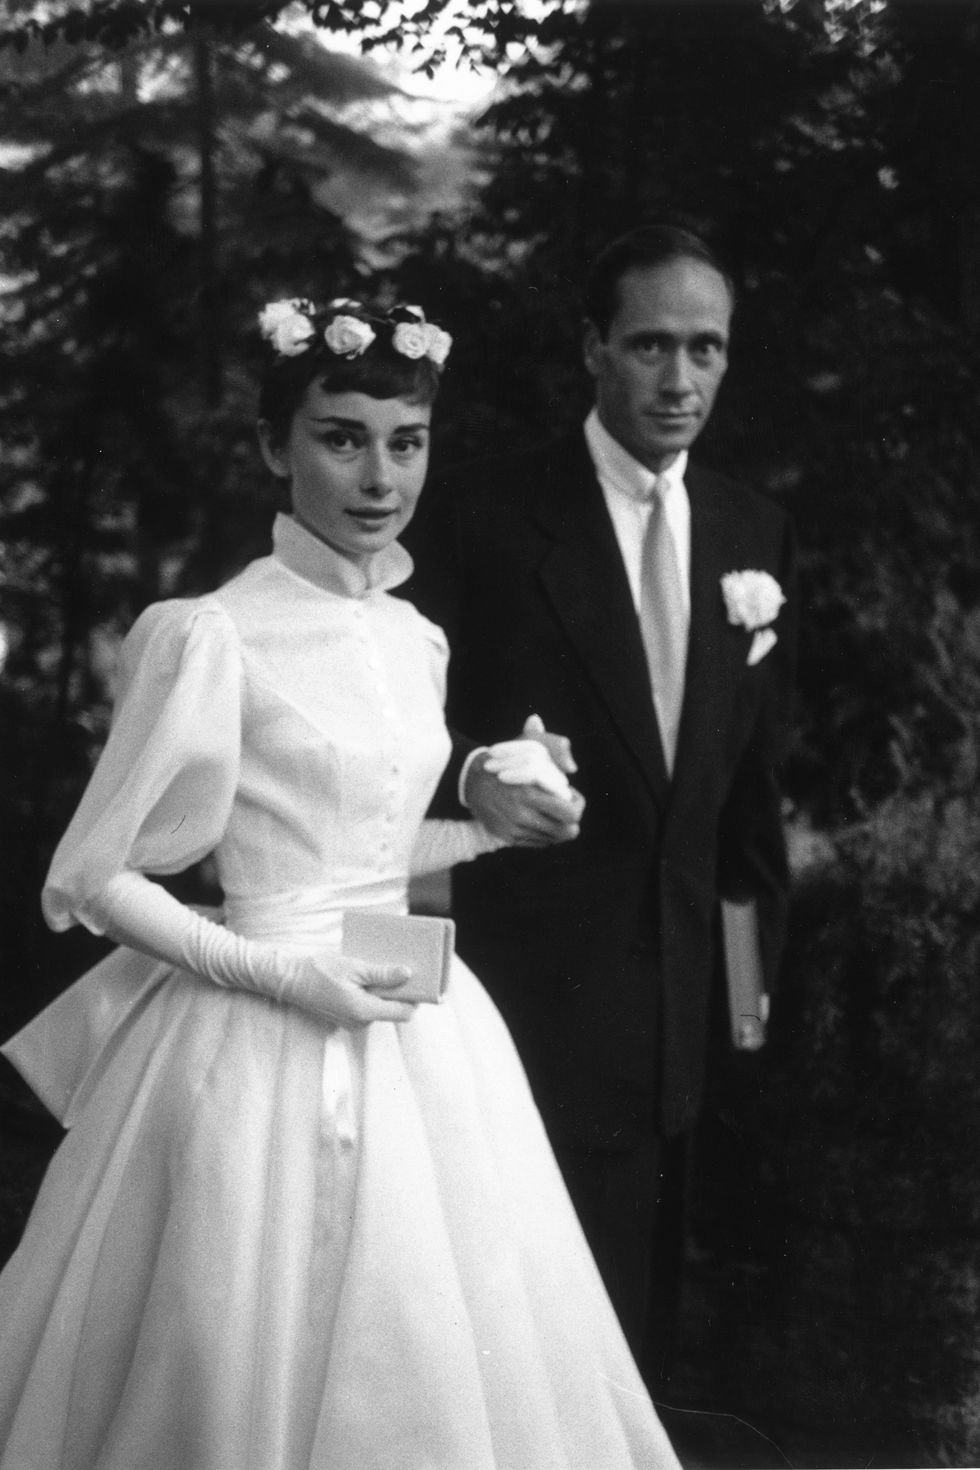 25th September 1954: Film star couple Audrey Hepburn (1929 - 1993) and Mel Ferrer on their wedding day. Dress designed by Balmain. (Photo by Ernst Haas/Ernst Haas/Getty Images)